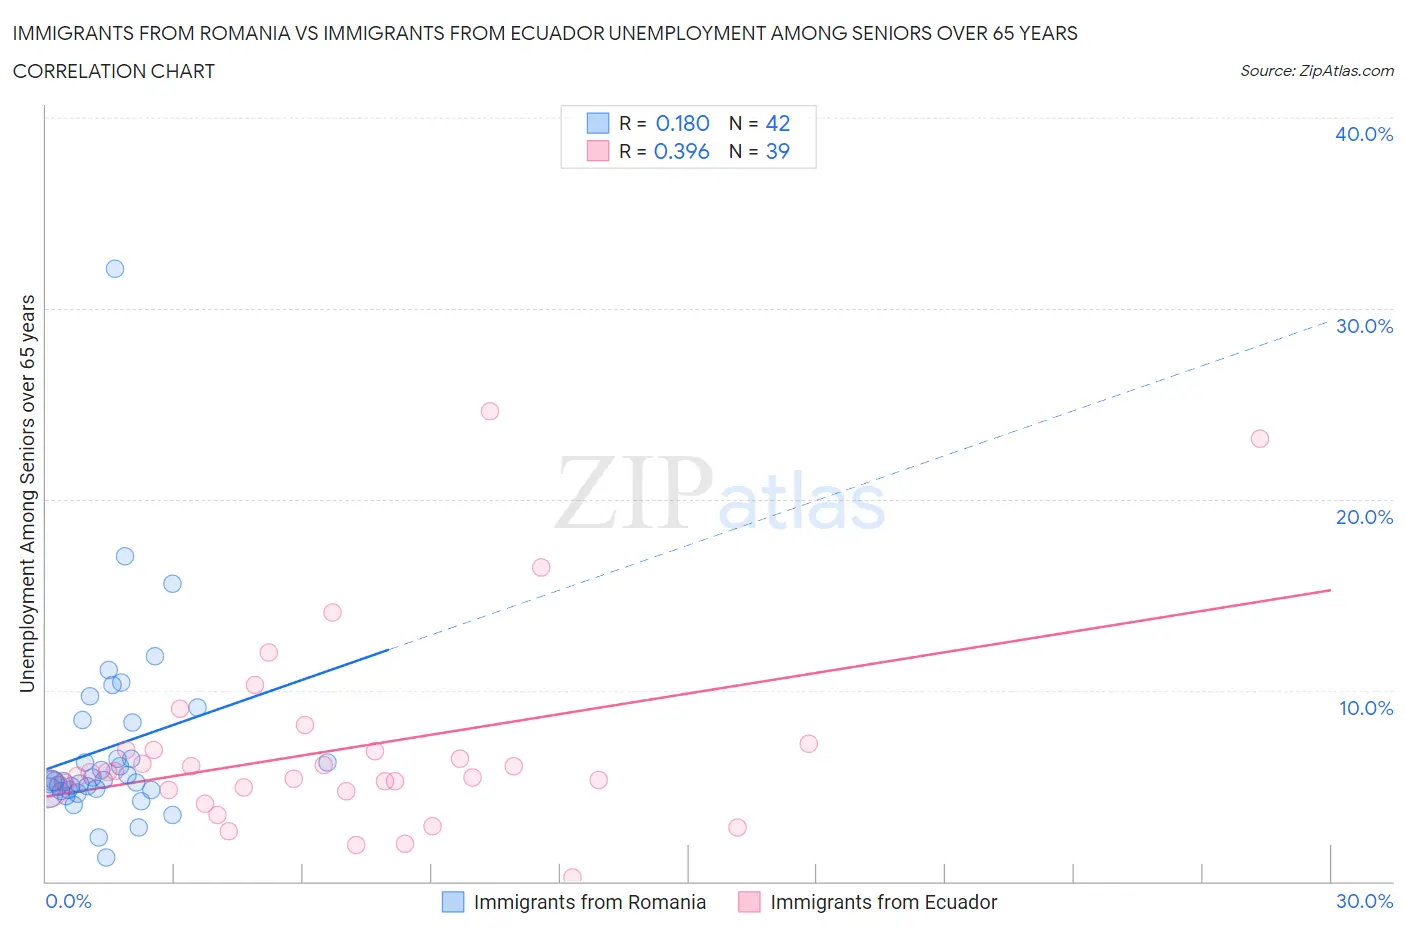 Immigrants from Romania vs Immigrants from Ecuador Unemployment Among Seniors over 65 years